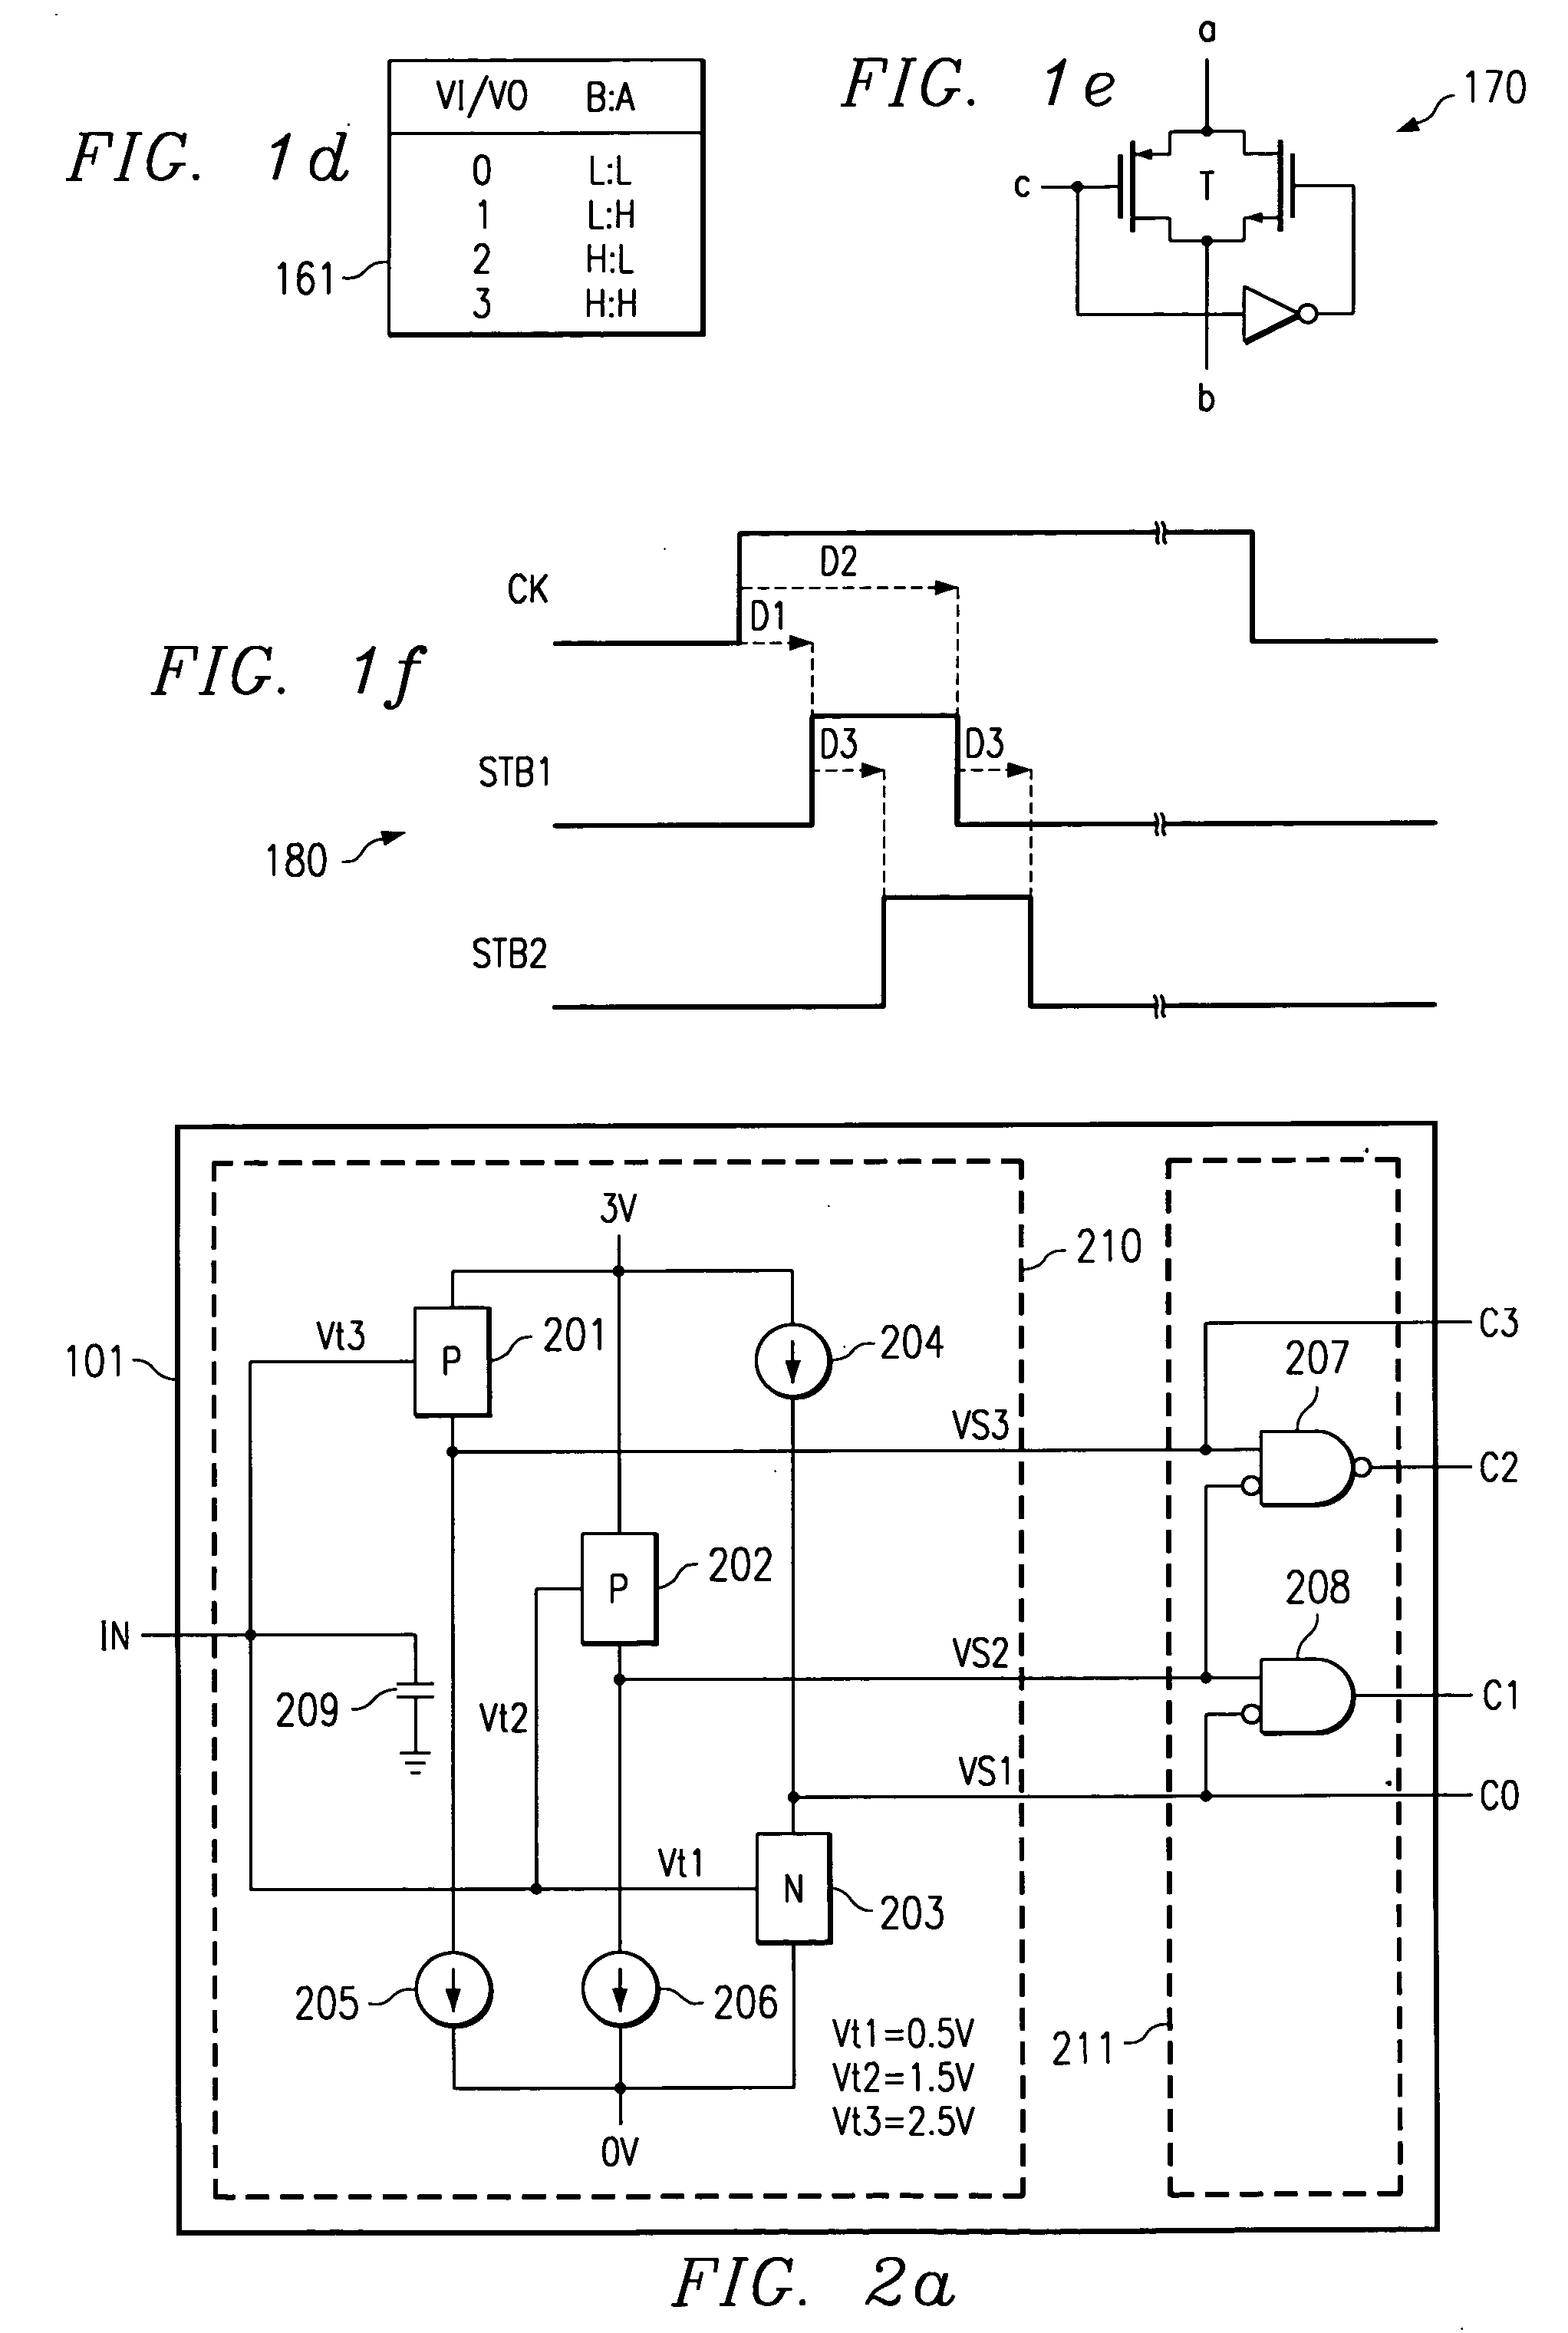 Quad state logic design methods, circuits, and systems